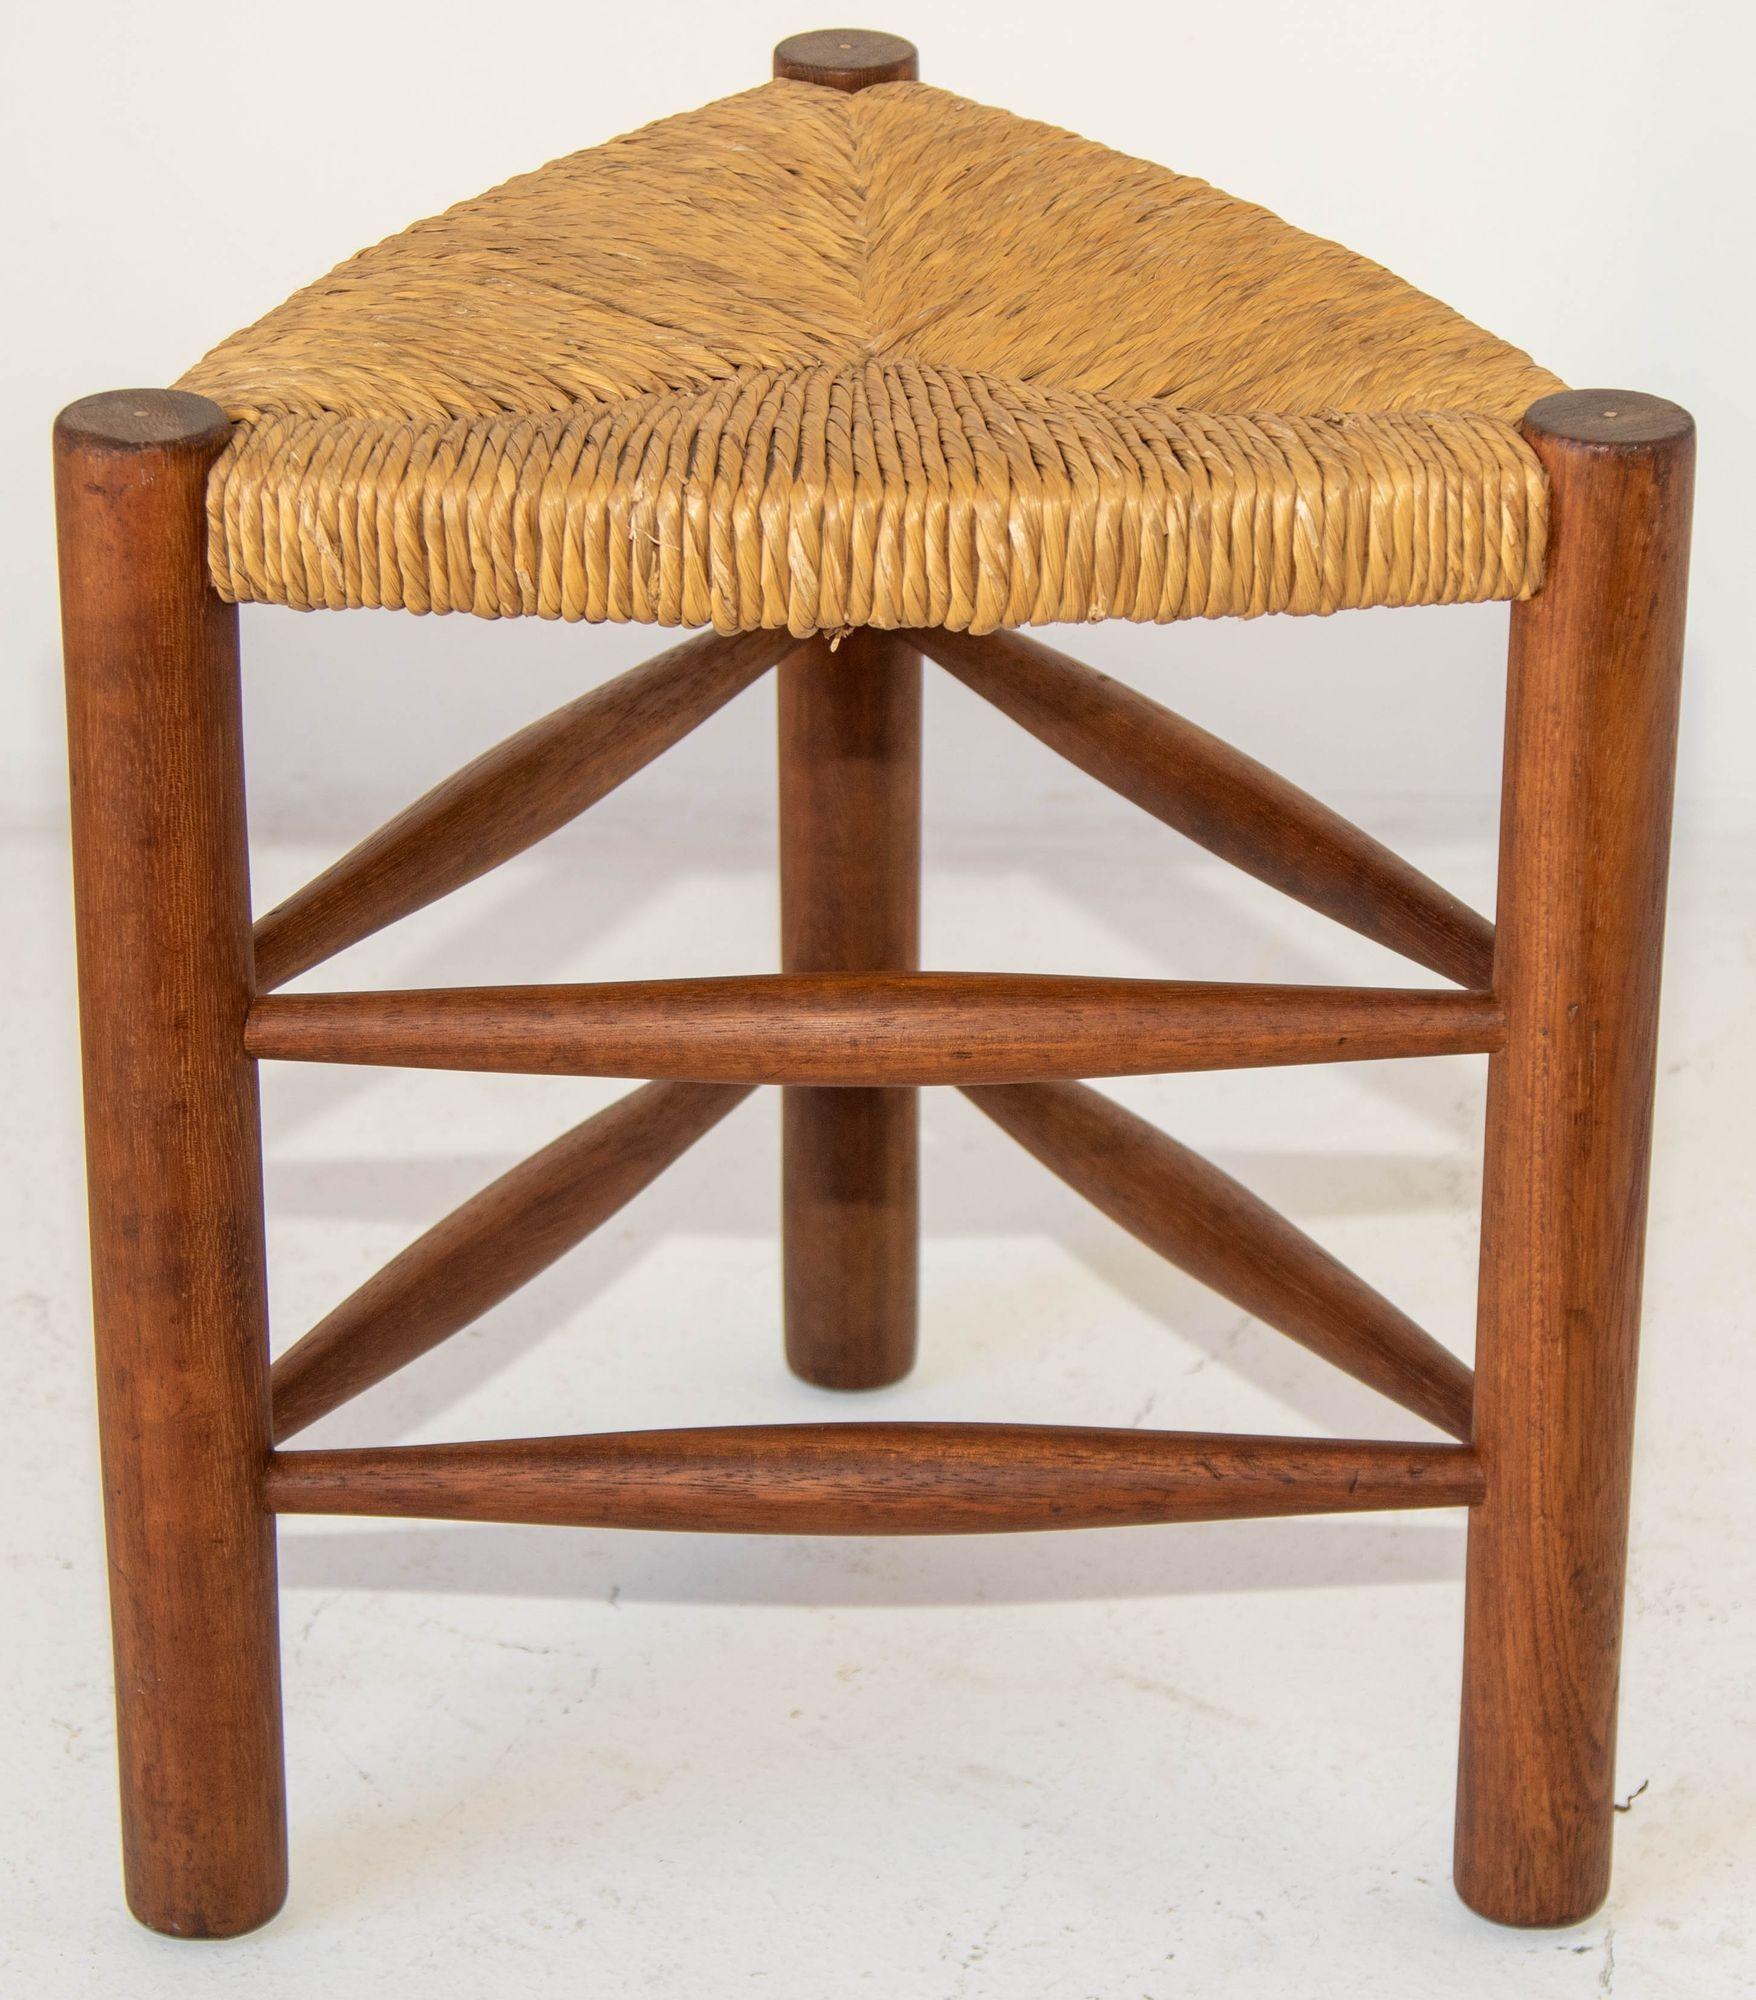 Vintage midcentury French wooden triangular stool with rush seat, circa 1950s.
Woven straw wooden stool on tripod legs, in good vintage condition and with a nice patina, the oak legs have been lightly waxed and refinished.
Typical example of the